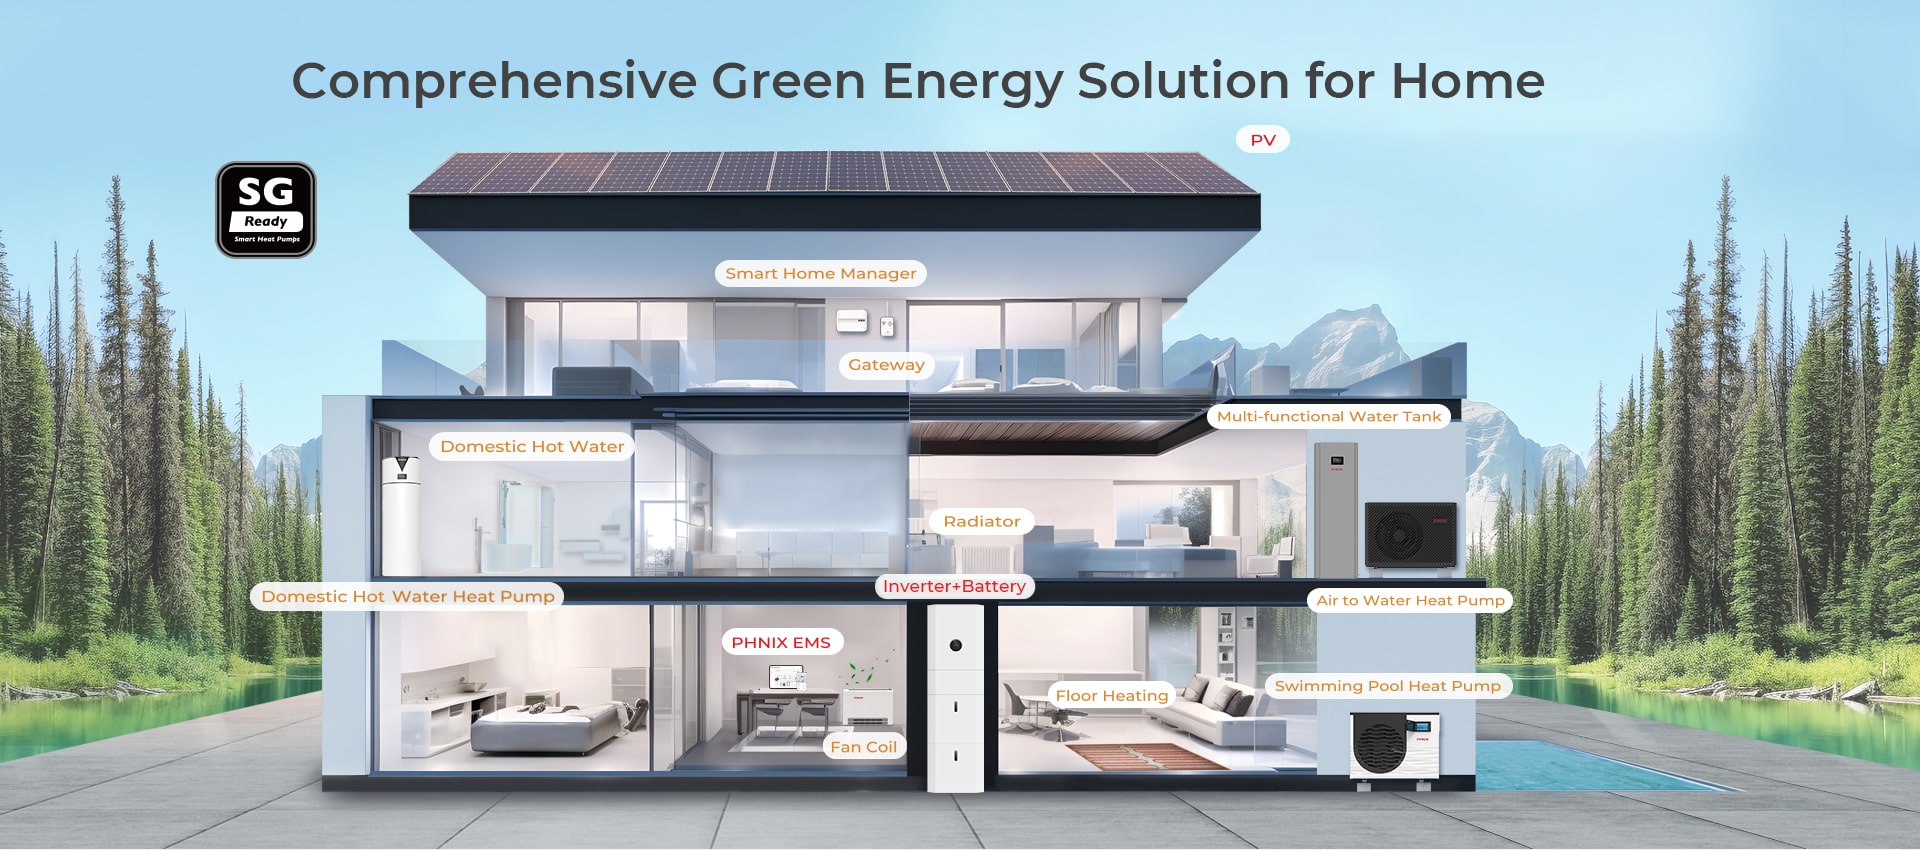 Comprehensive Green Energy Solution for Home